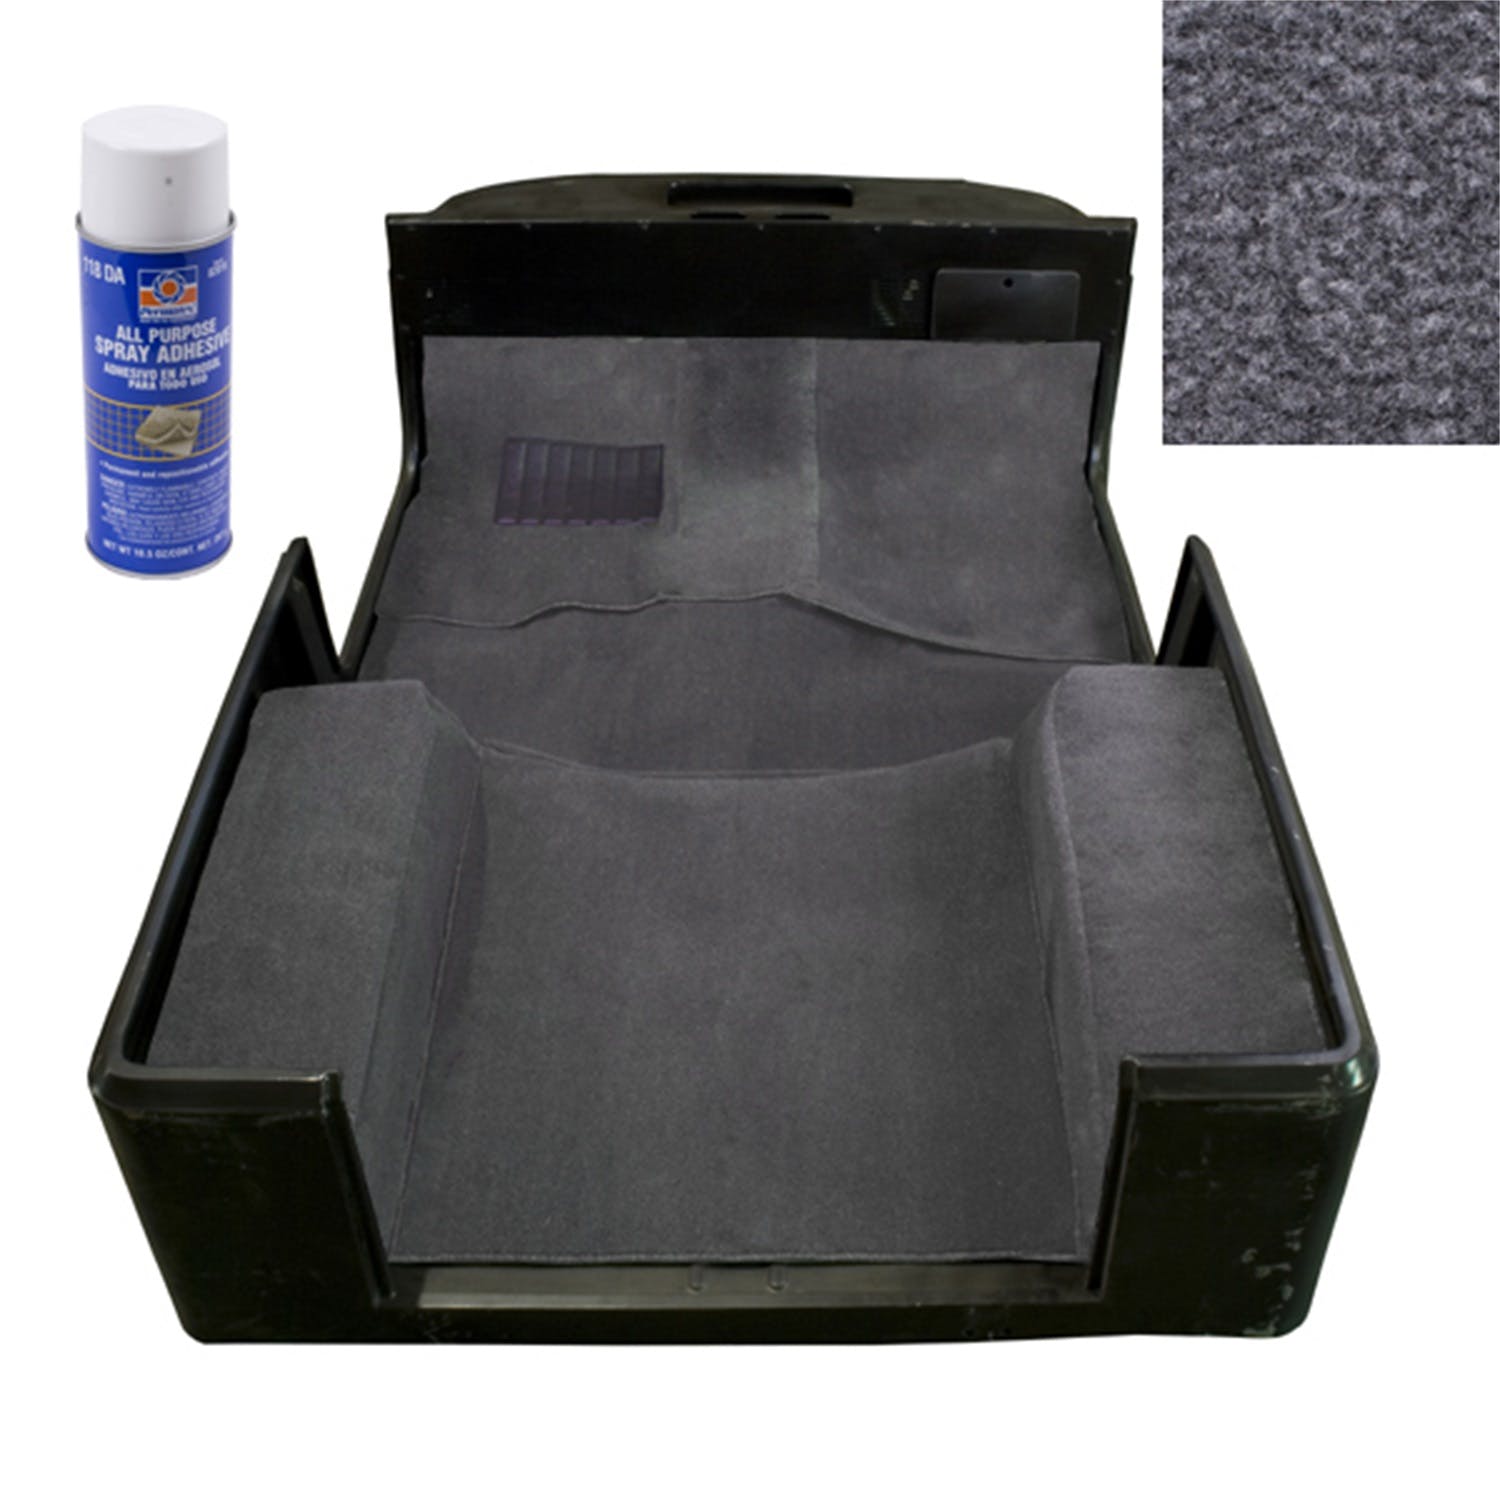 Rugged Ridge 13696.09 Deluxe Carpet Kit with Adhesive, Gray